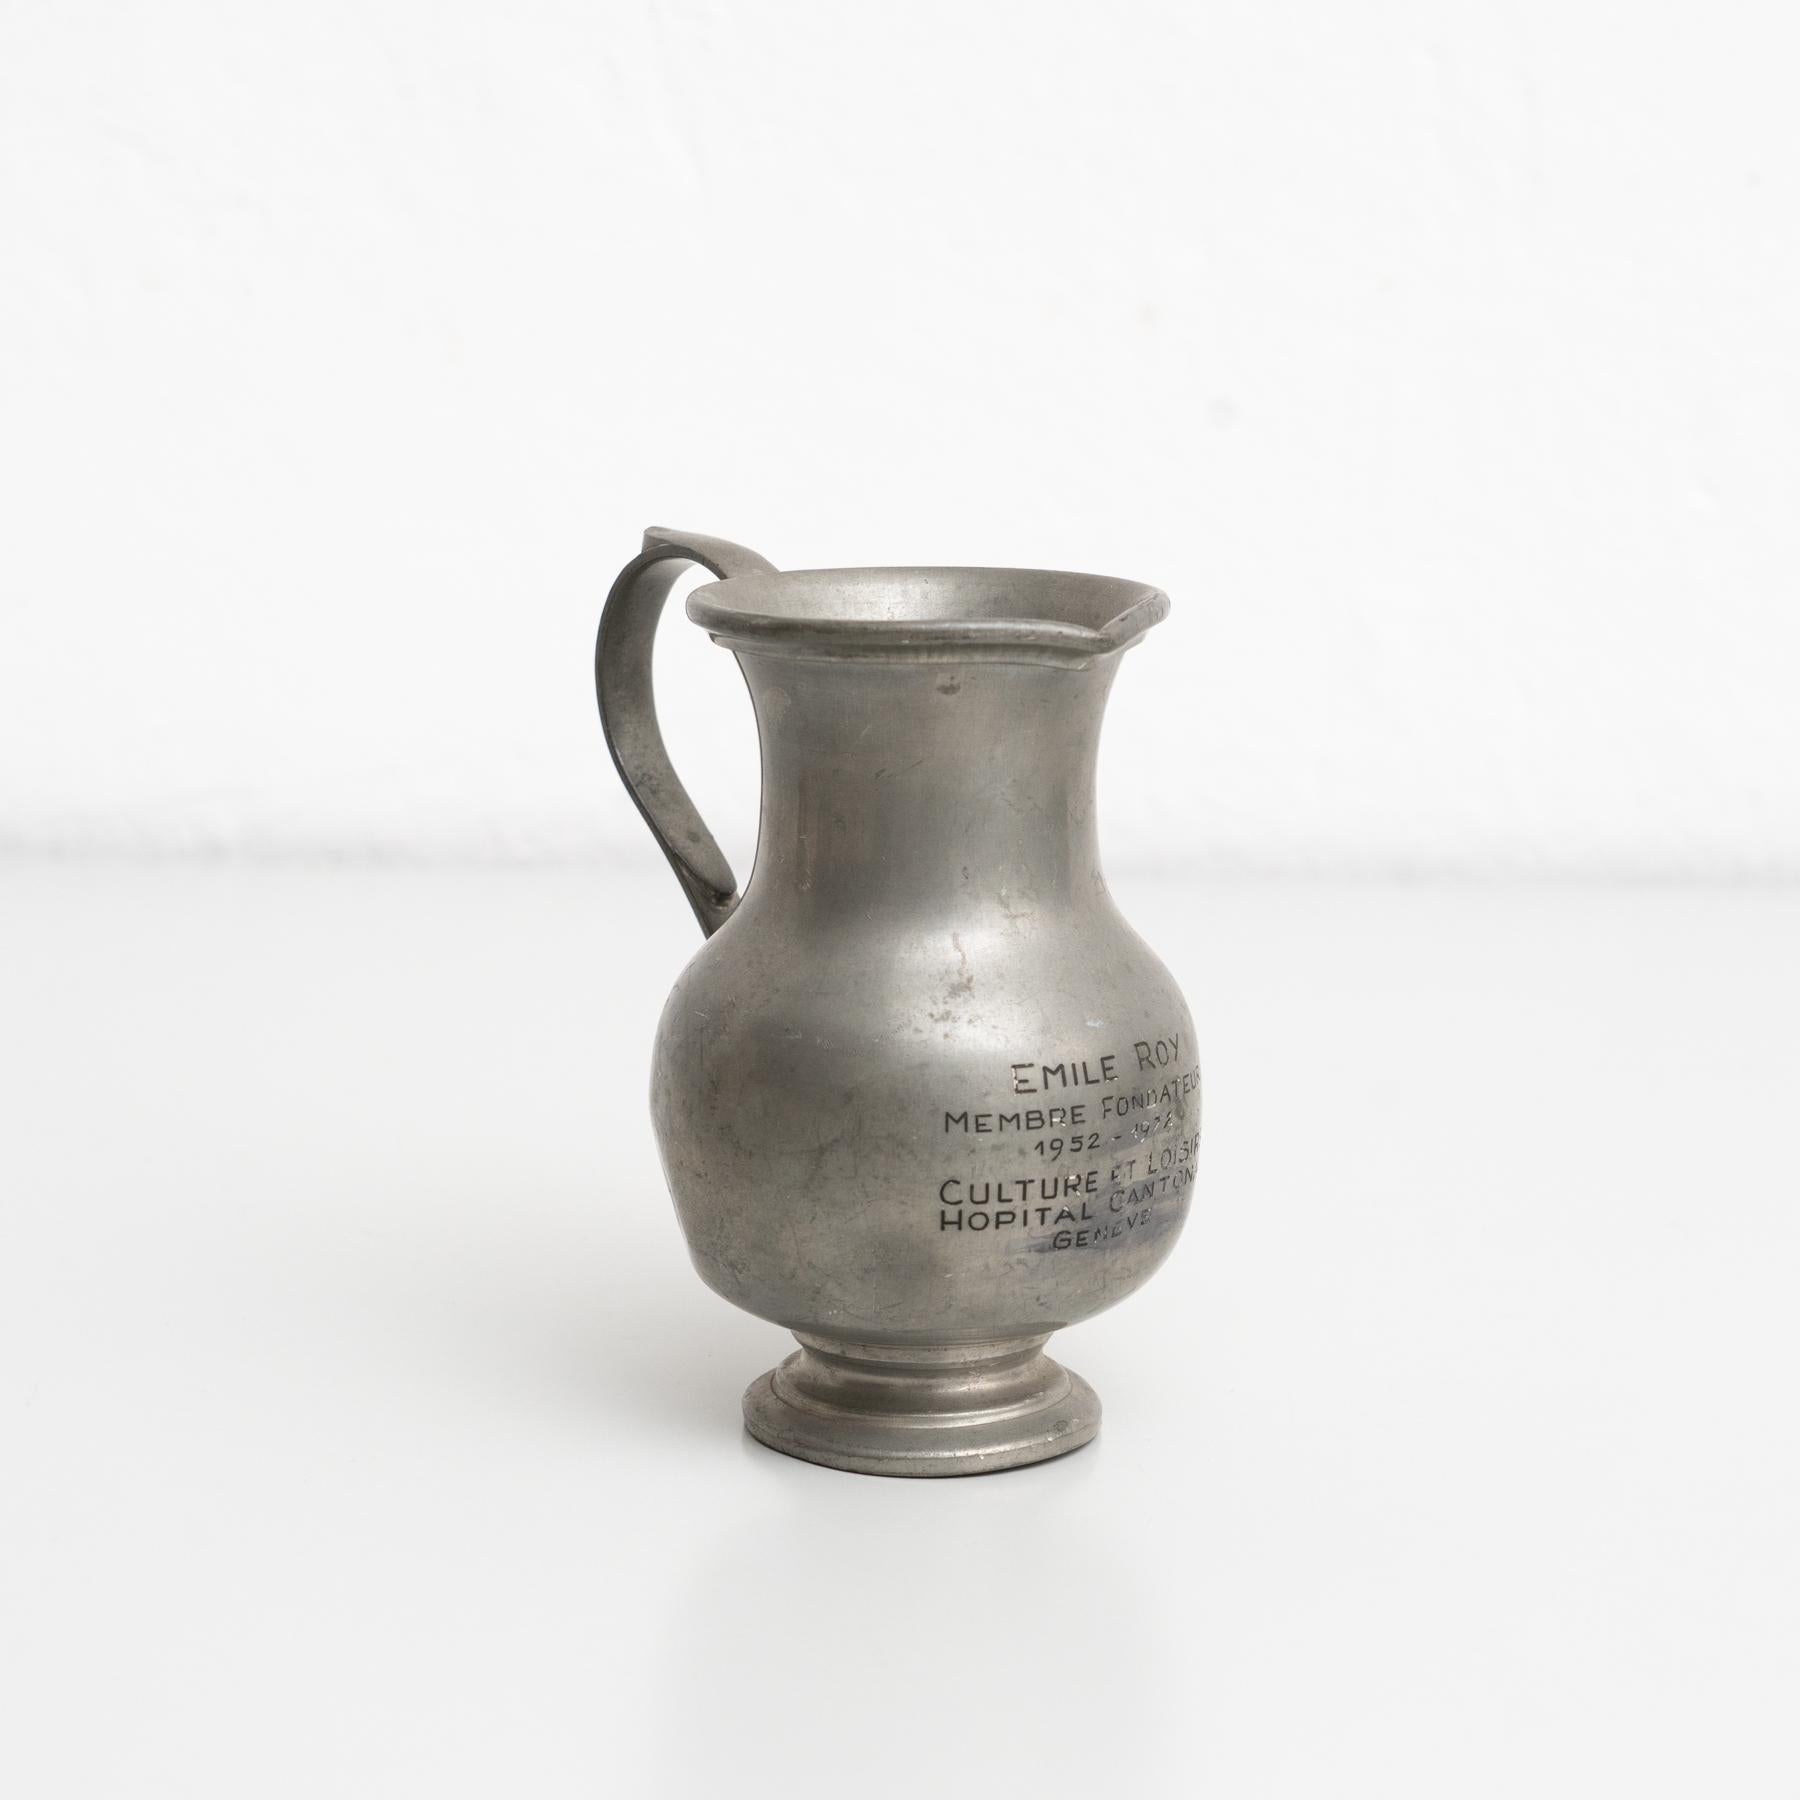 Vintage metal commemorative metal jug.

By unknown manufacturer, made in Switzerland circa 1970.

In original condition, with minor wear consistent with age and use, preserving a beautiful patina.

Materials:
Metal.
 